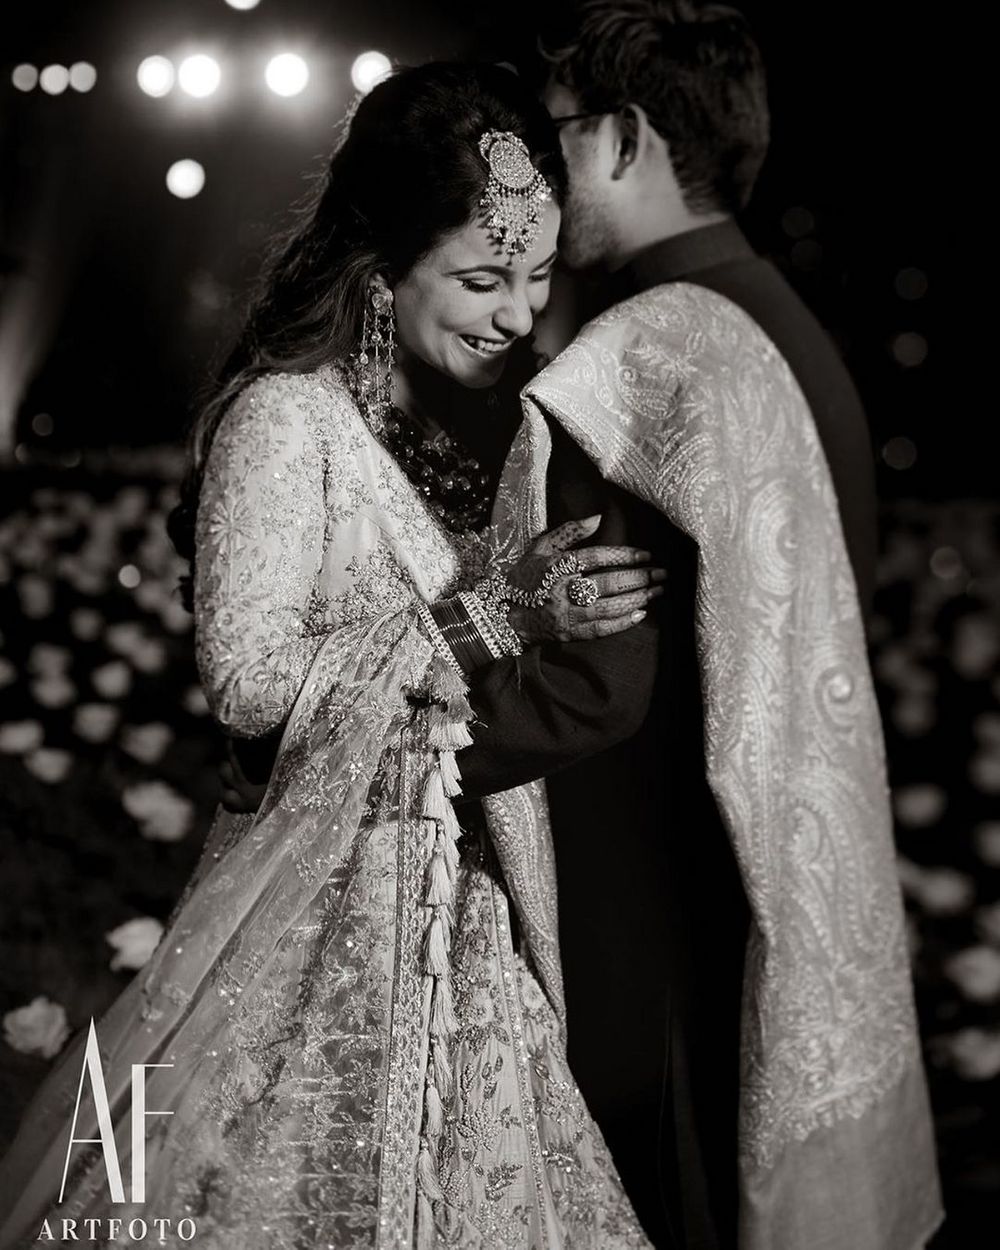 Photo of A candid shot of a bride and groom hugging each other.